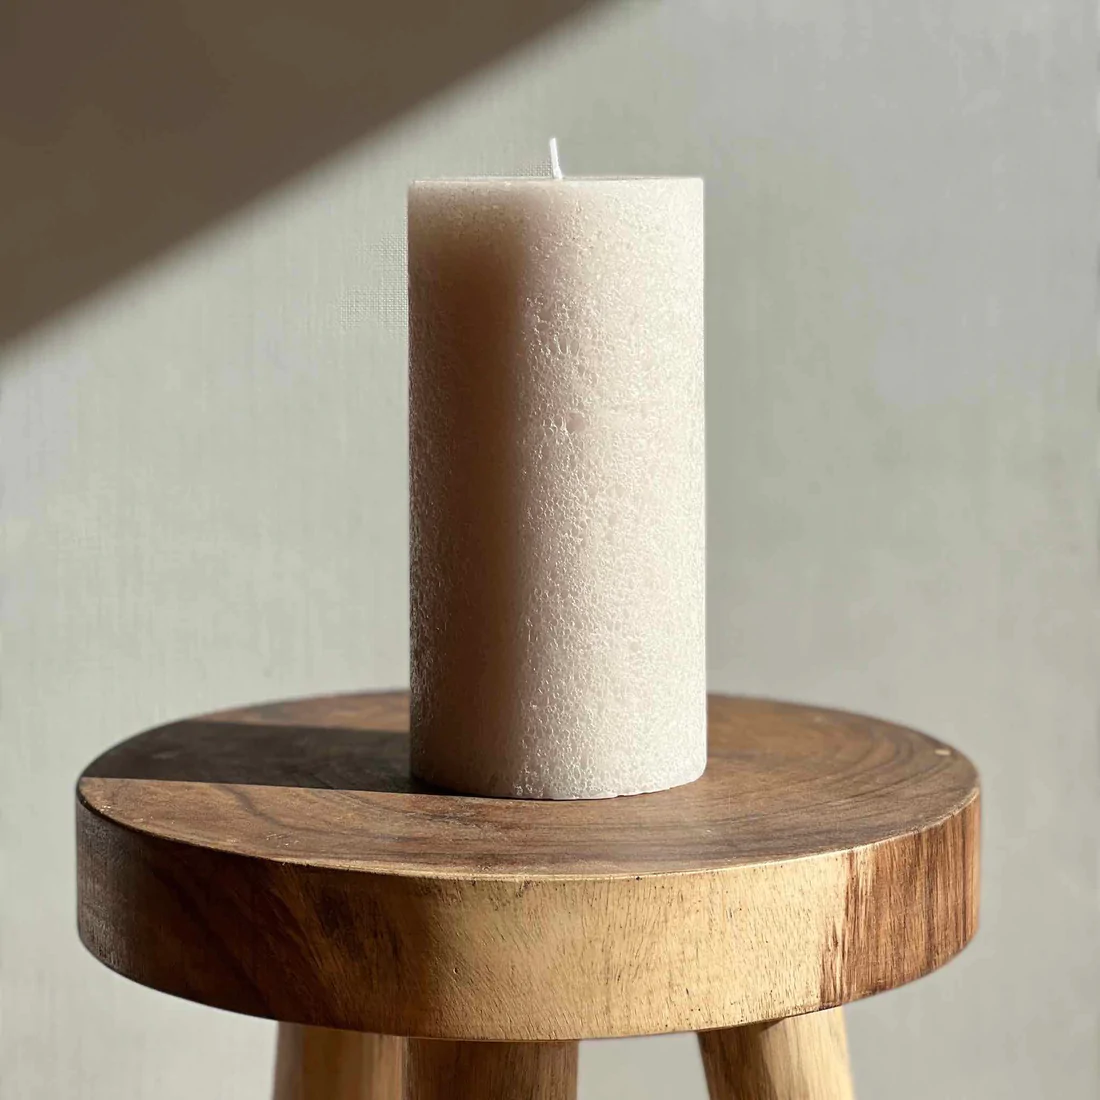 Candle Kiosk - Textured Sandstone Pillar Candles - medium candle on wood stool - Stocked at LOVINLIFE Co Byron Bay for all your gifts, candles and interior decorating needs